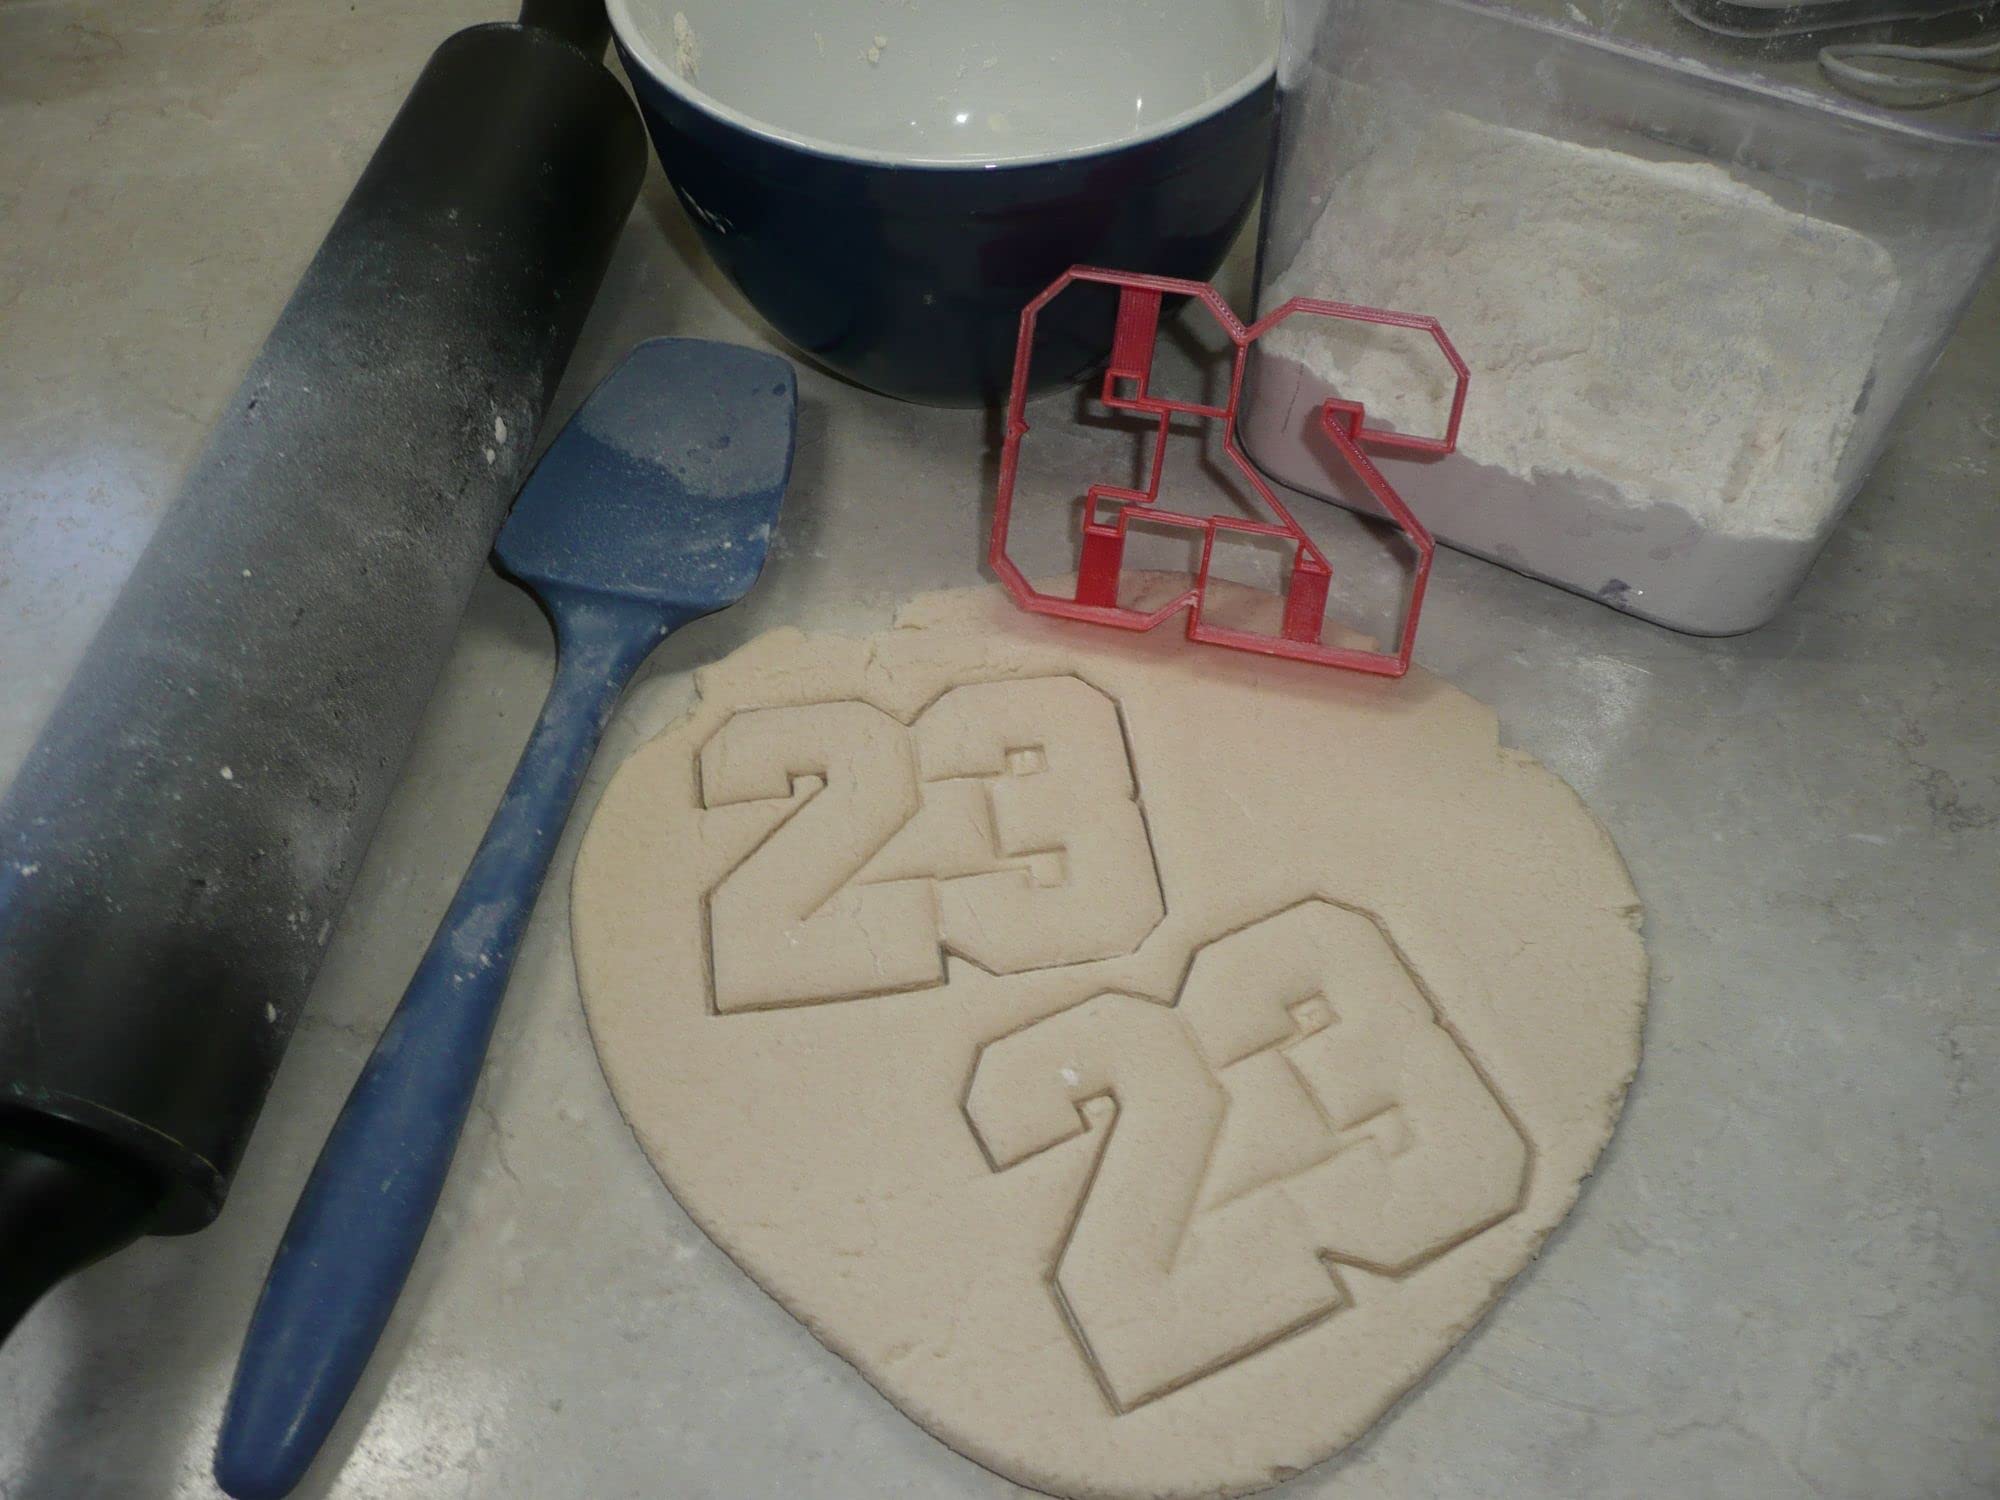 INSPIRED BY NUMBER 23 BASKETBALL LEGEND COOKIE CUTTER MADE IN USA PR4462